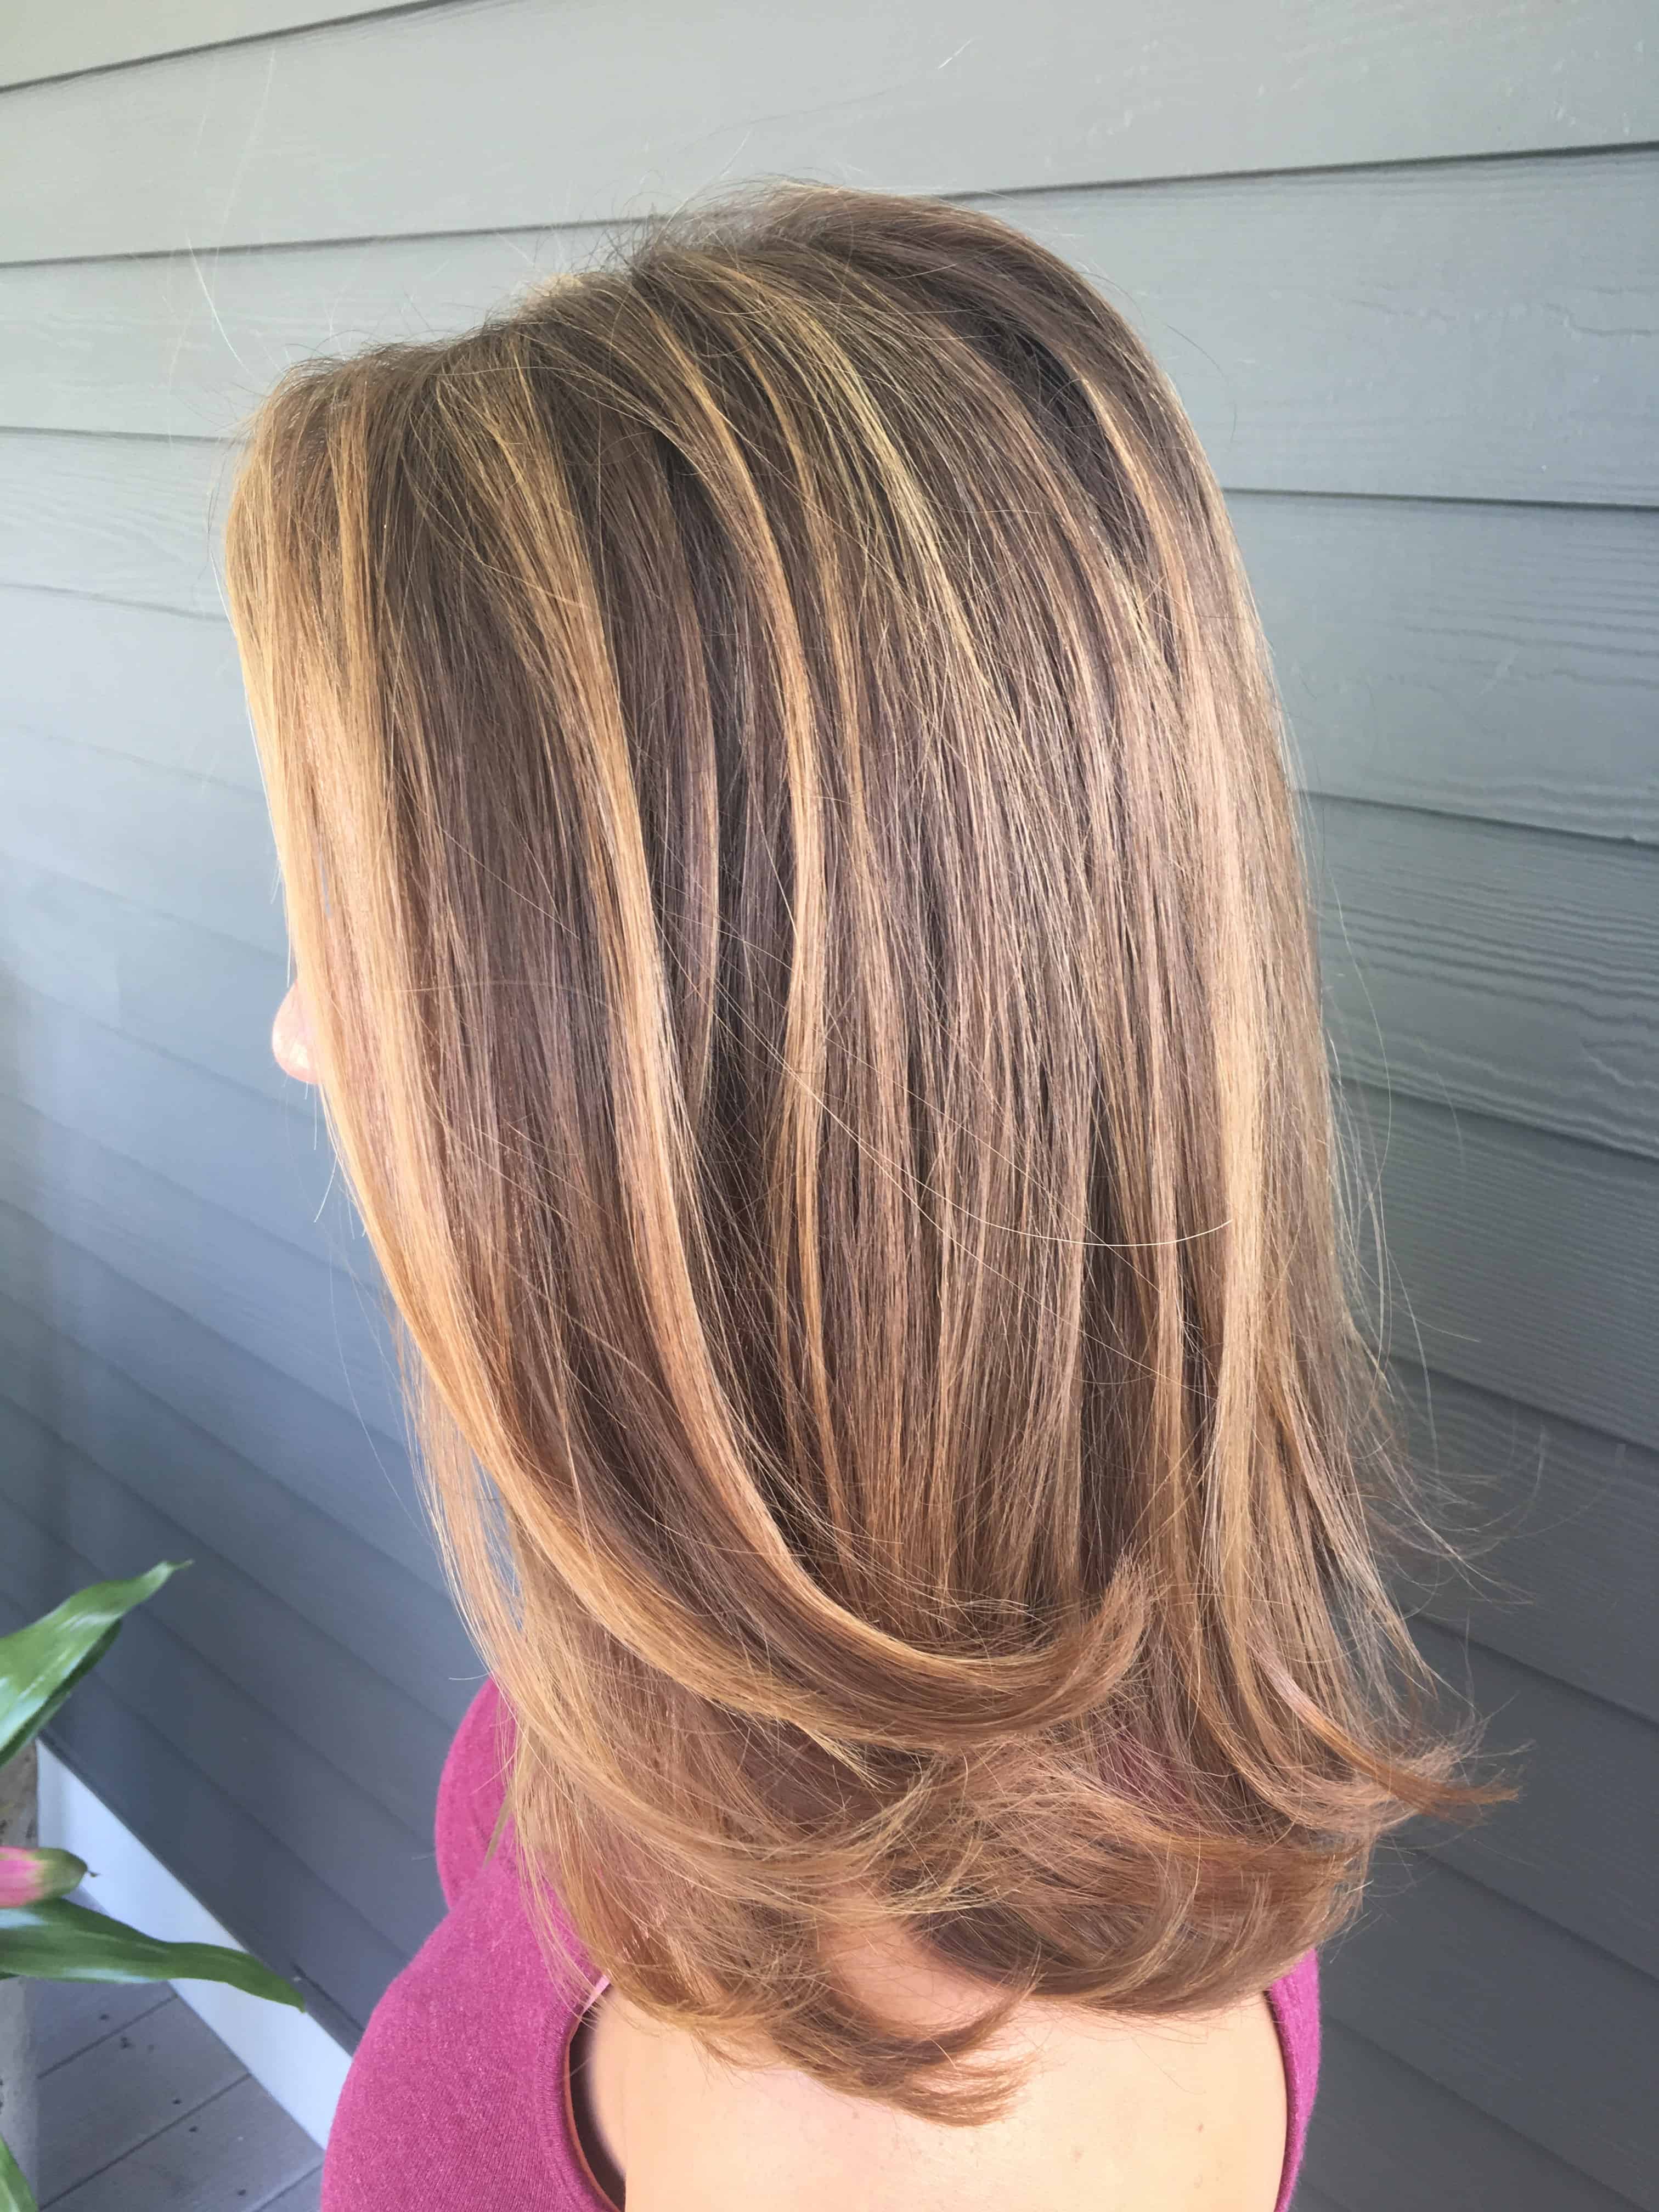 Foil Highlight and Haircut - Color Services - Hair Designer in Williamsburg